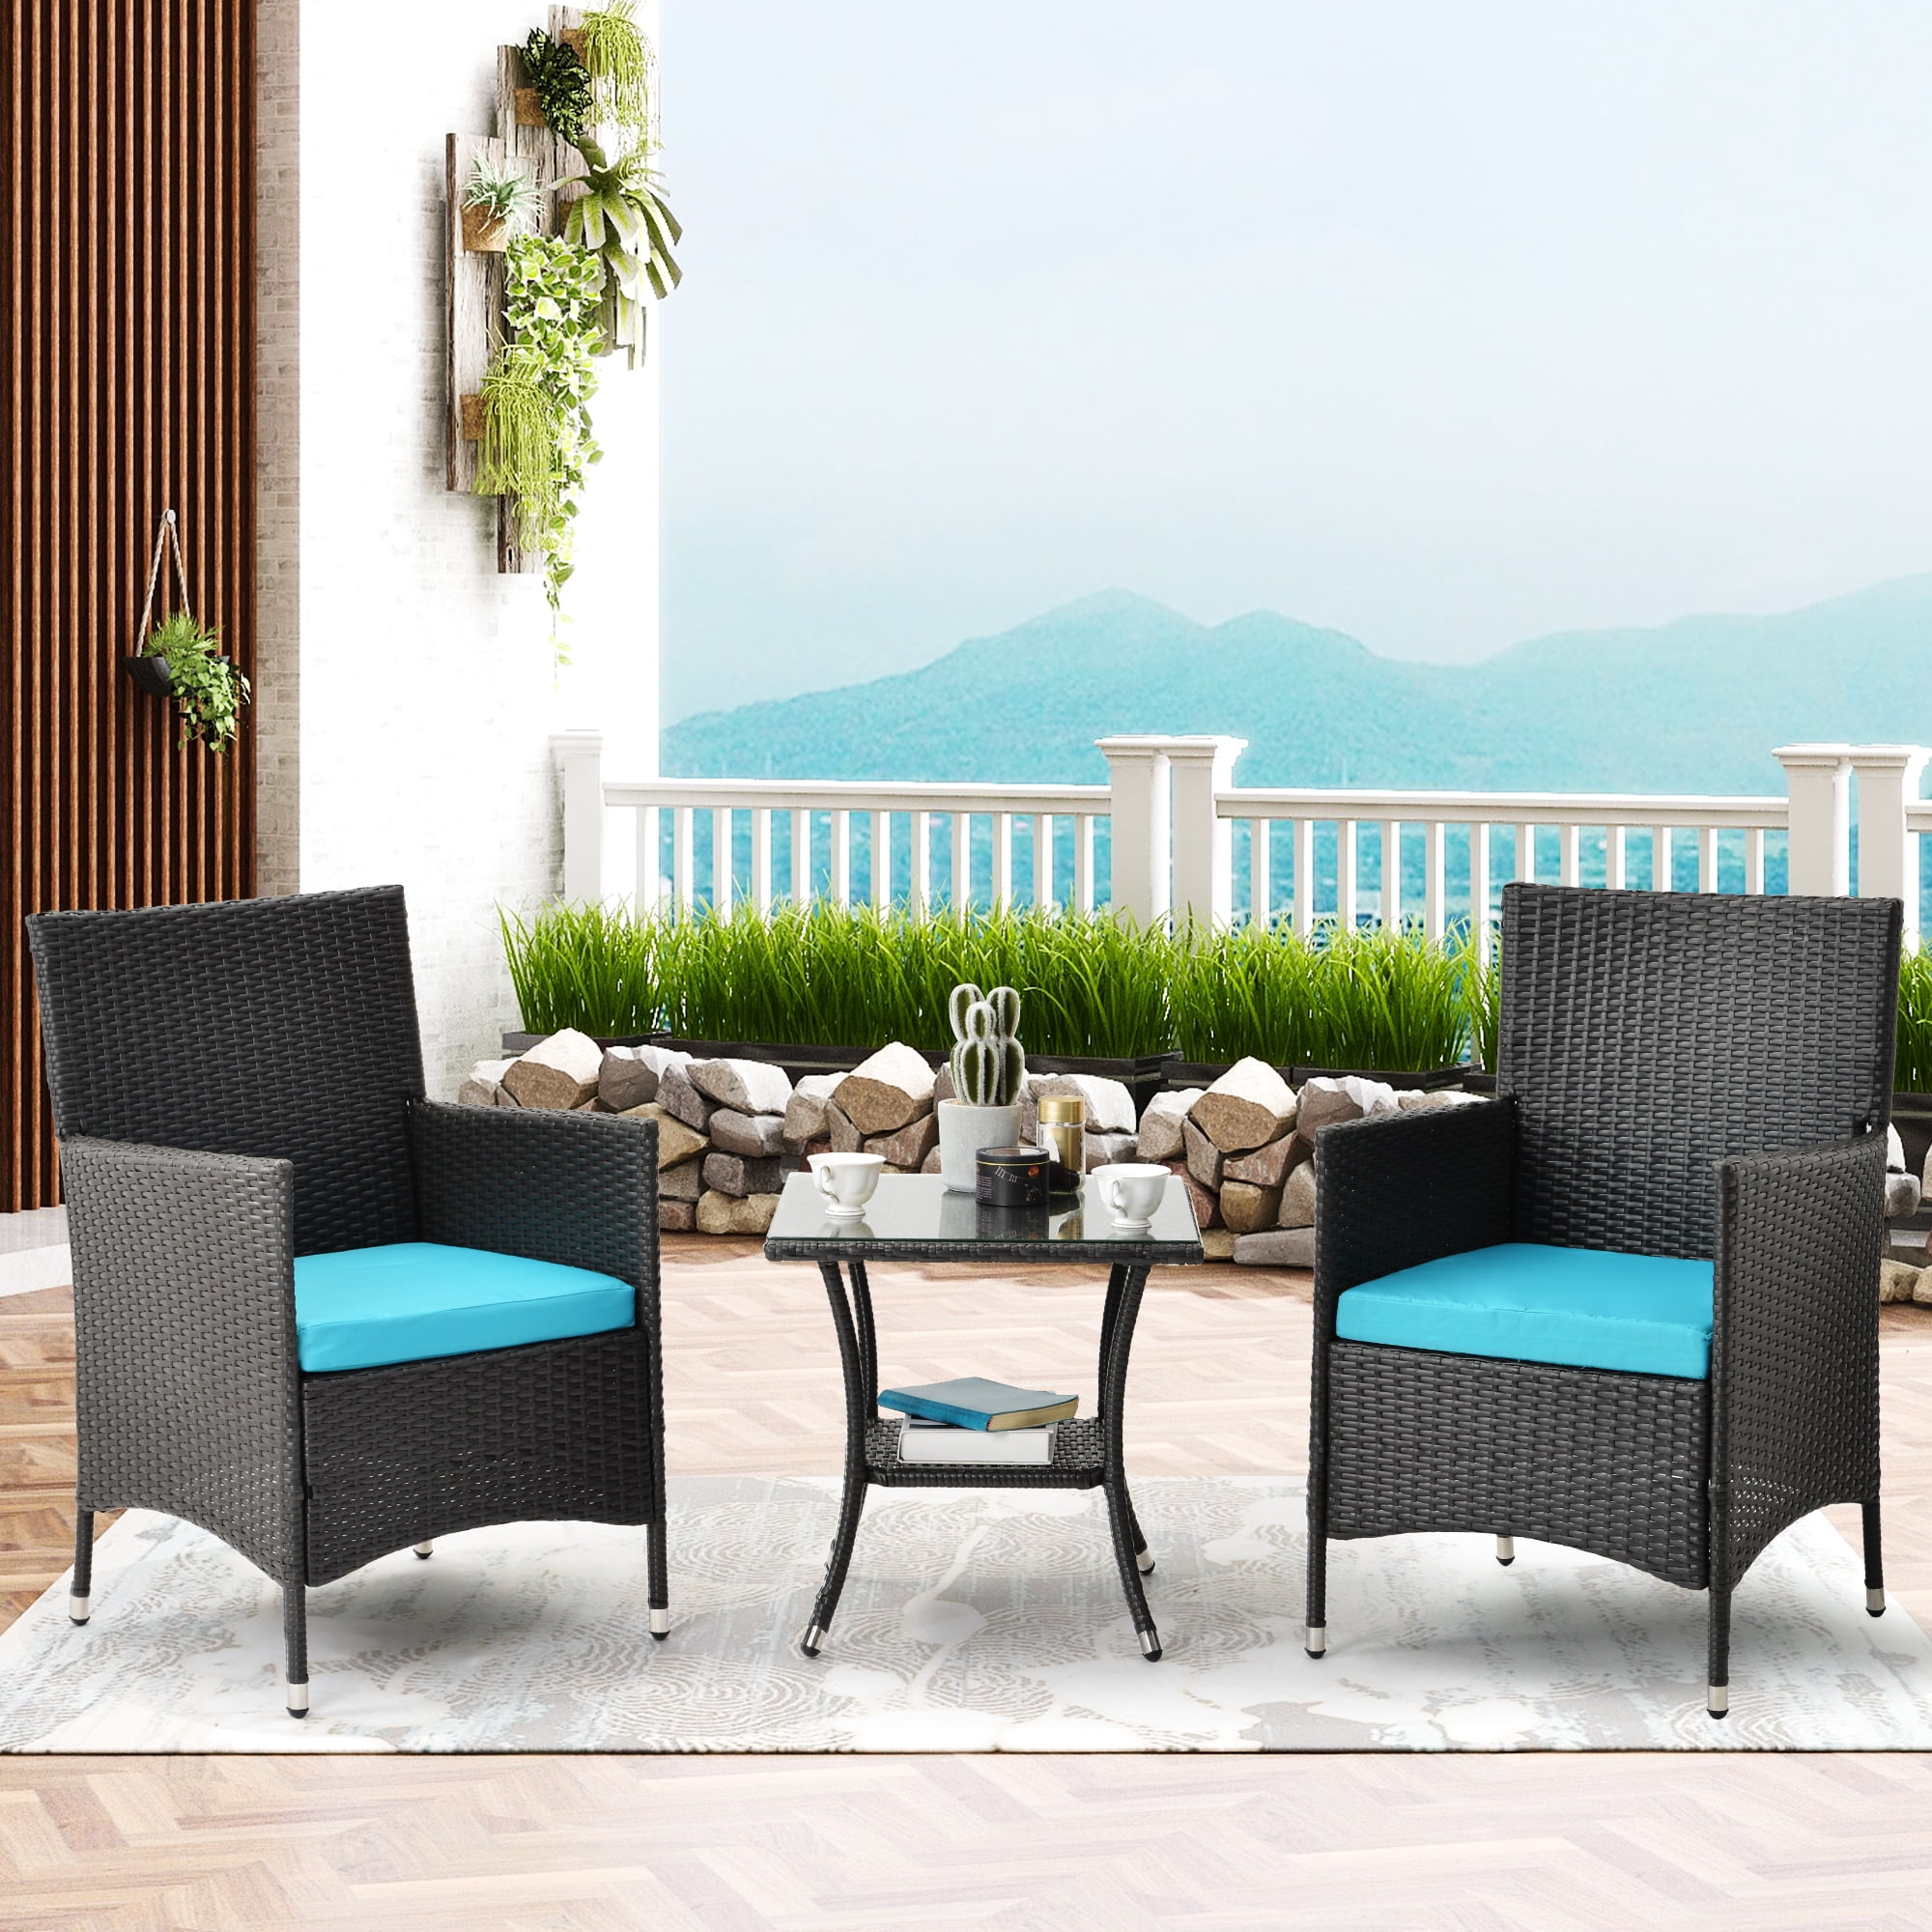 3-Piece Patio Furniture Sets Clearance, Wicker Patio Furniture with Two